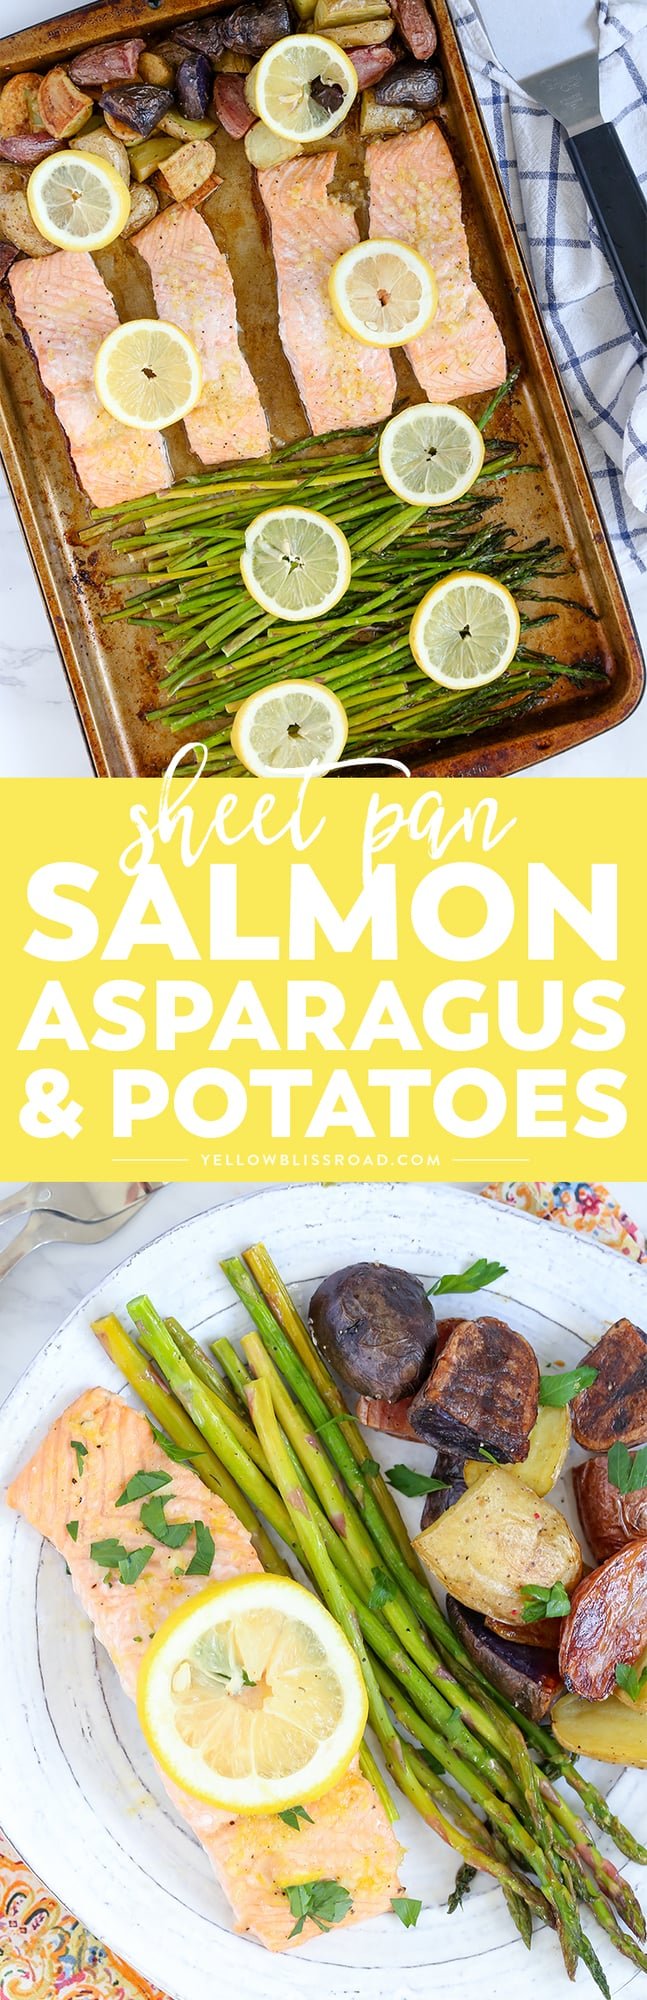 This Salmon, Asparagus & Potatoes Sheet Pan Dinner is a delicious one pan meal that saves valuable time in the kitchen - it's a delicious, easy weeknight meal!